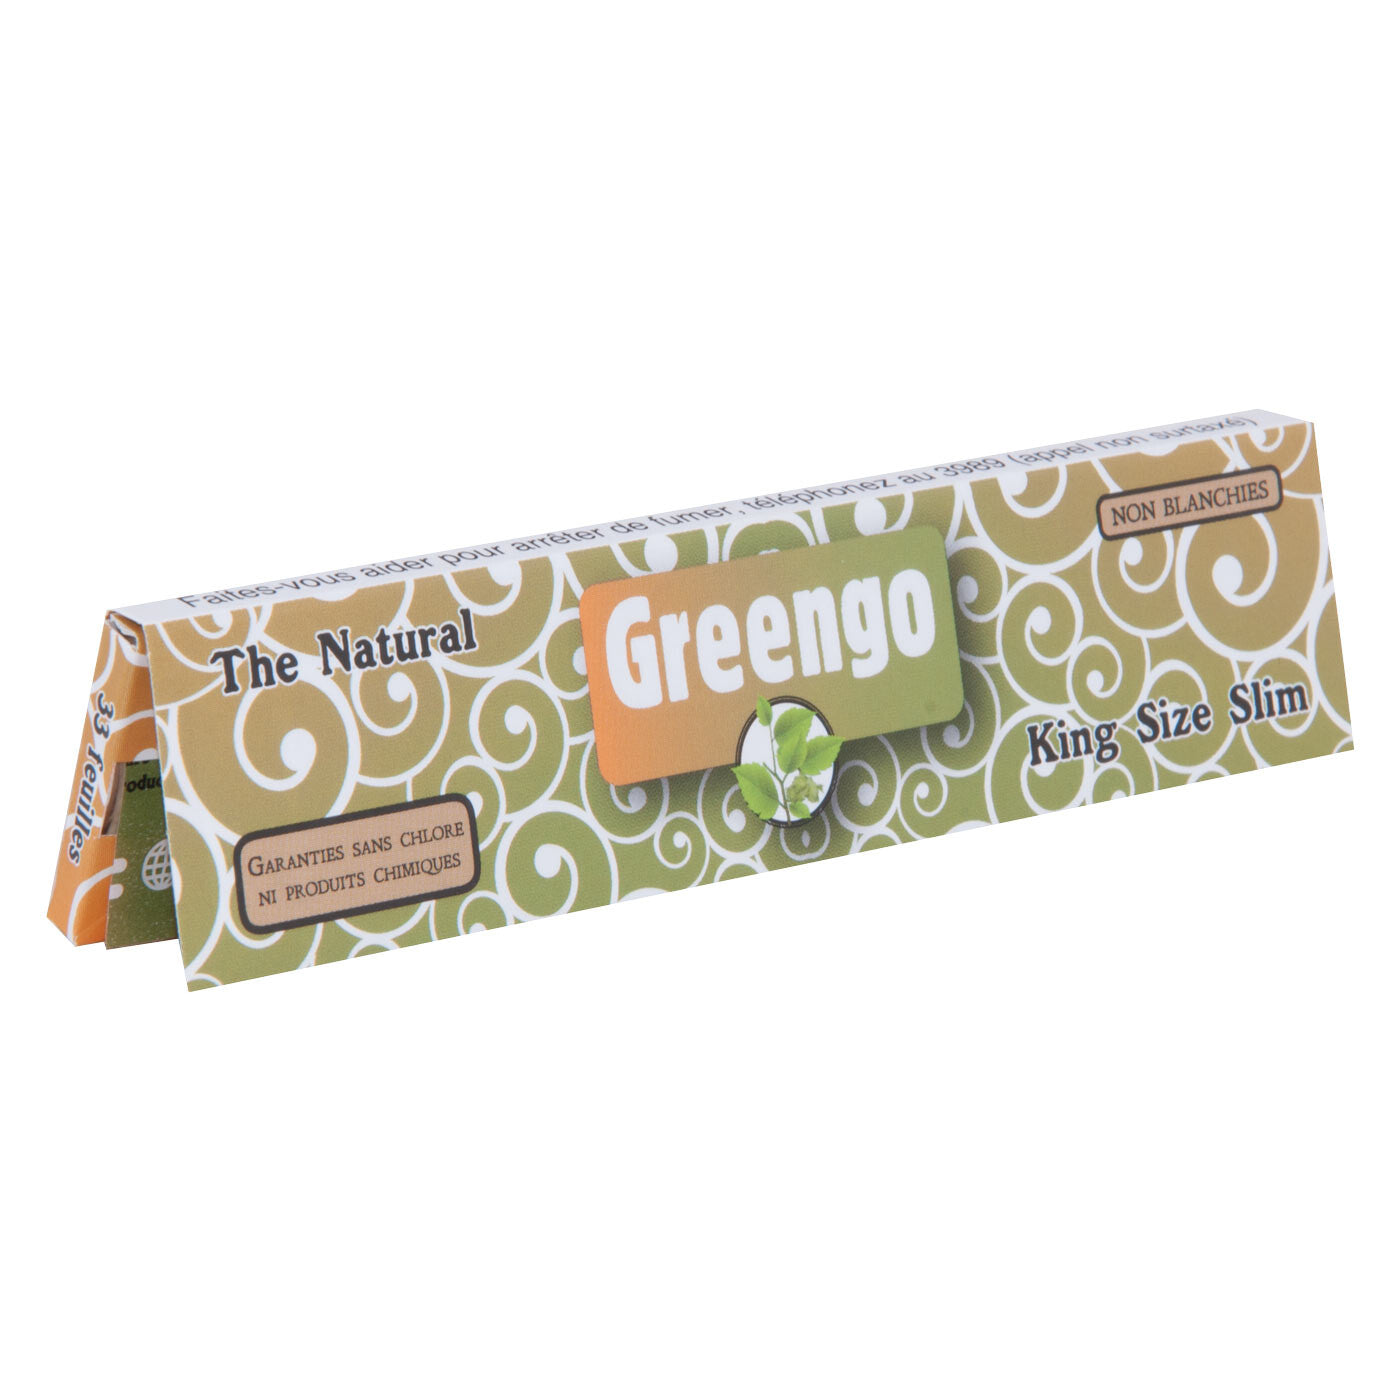 French Greengo Unbleached King Size Slim 1 Pc zijkant